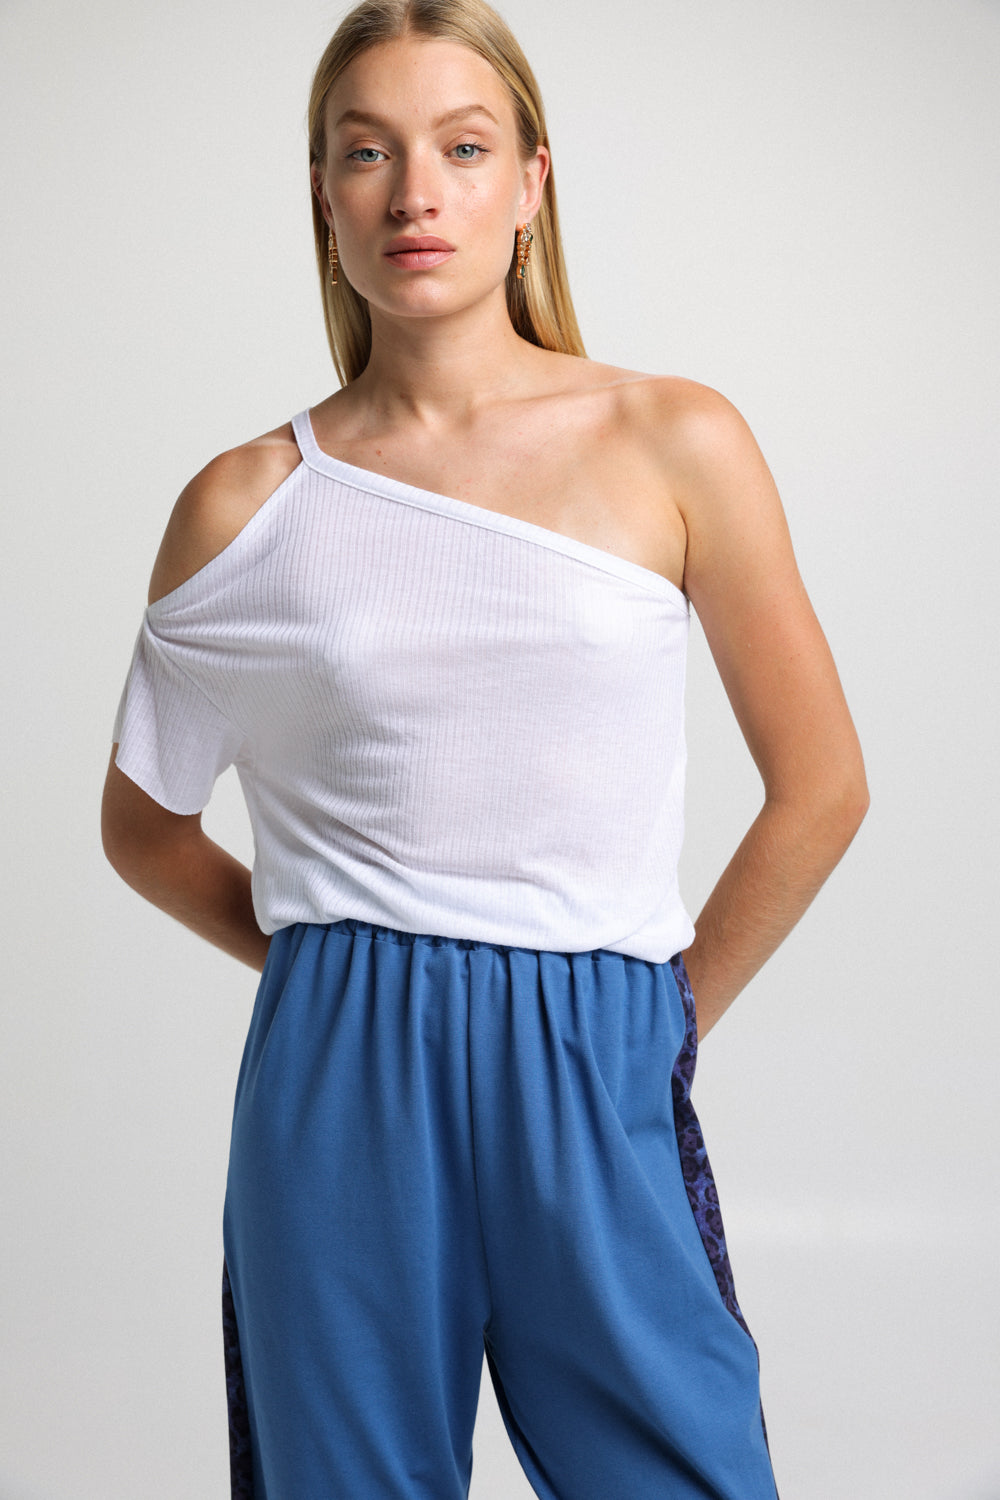 Now White One Shoulder Top